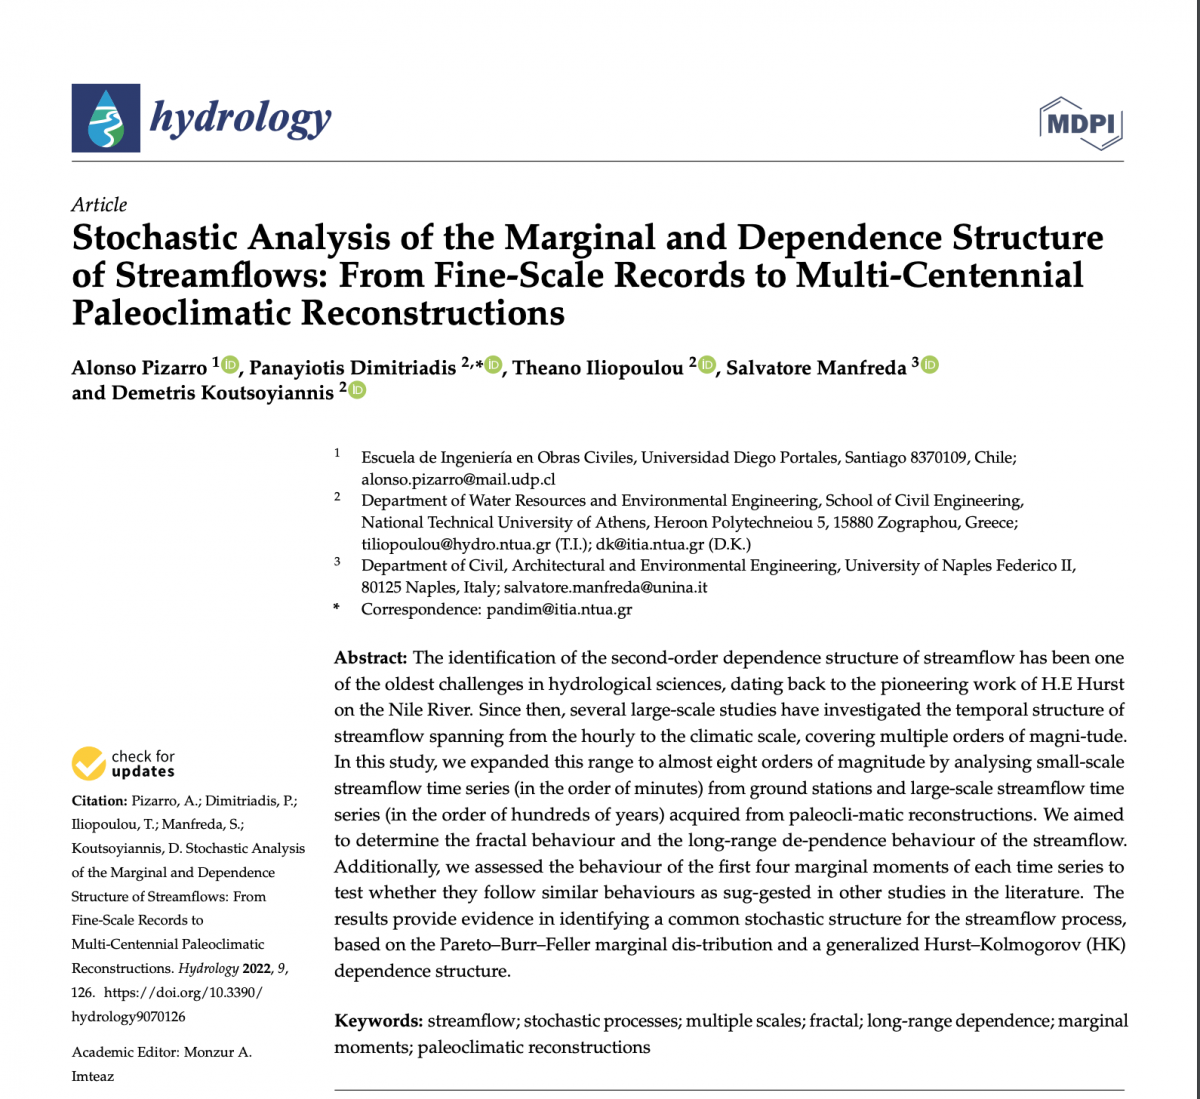 Stochastic Analysis of the Marginal and Dependence Structure of Streamflows: From Fine-Scale Records to Multi-Centennial Paleoclimatic Reconstructions